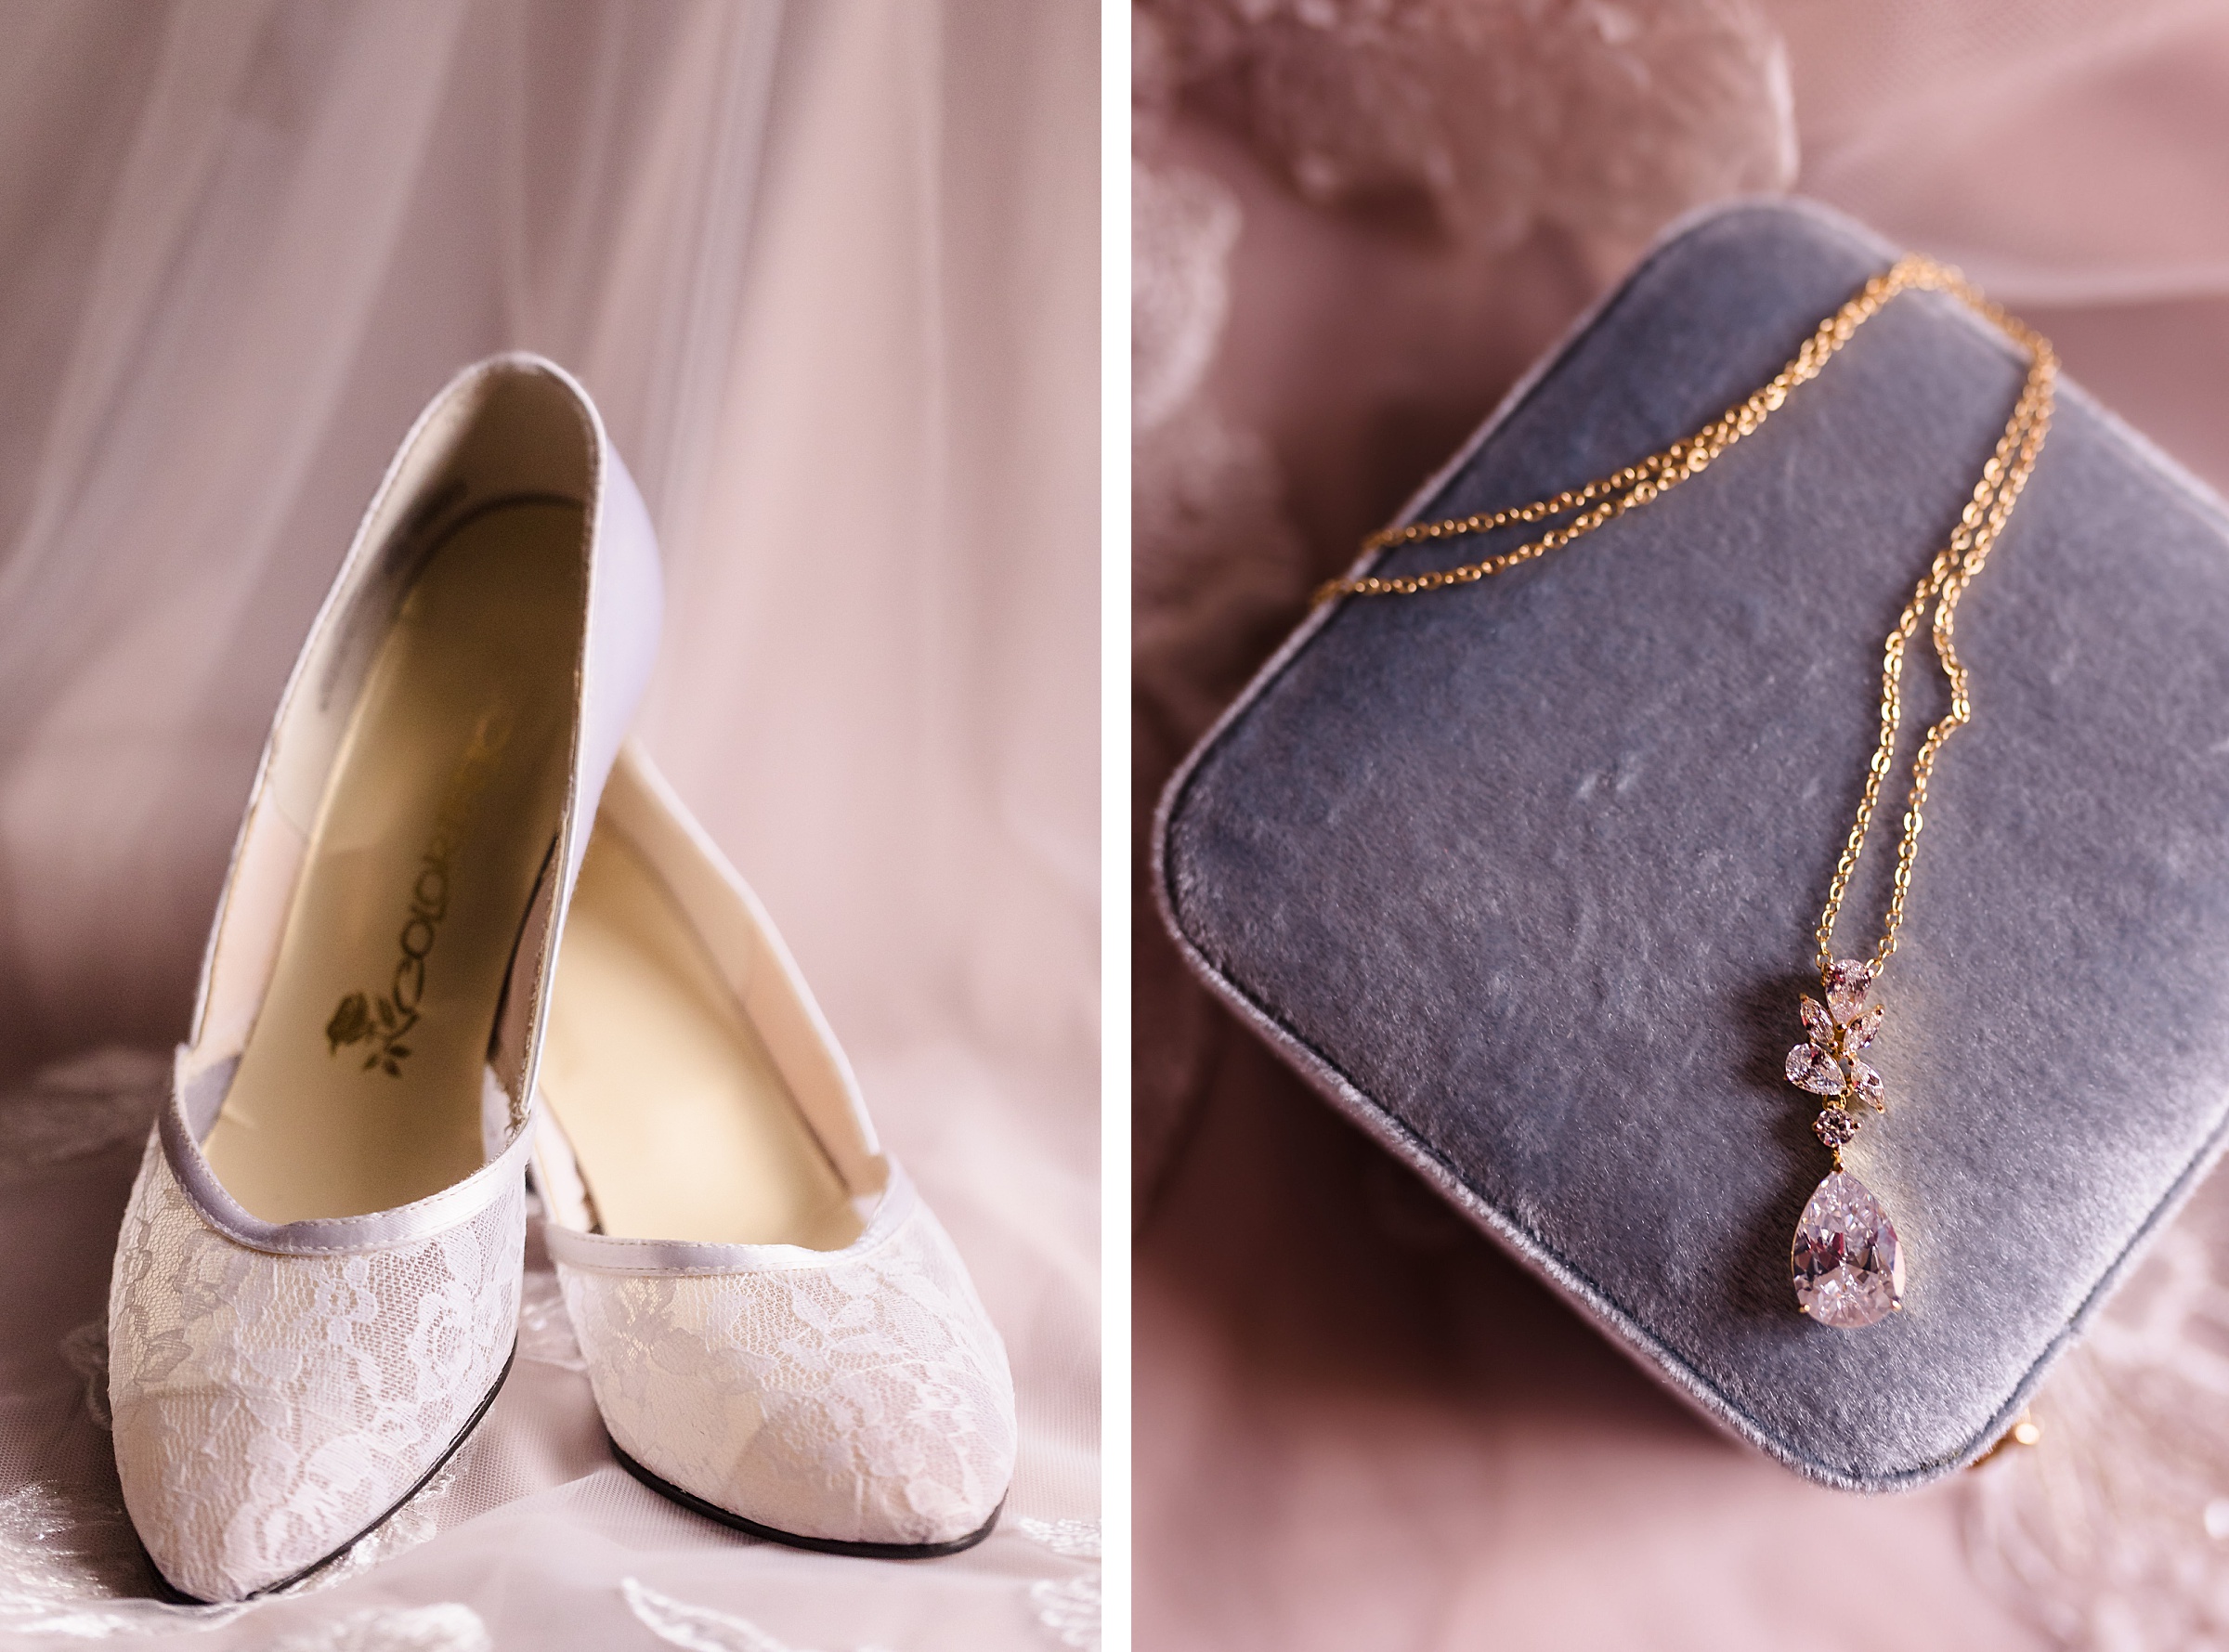 Shoes & Necklace on display before a wedding at the Hotel Pere Marquette in Peoria, Illinois.